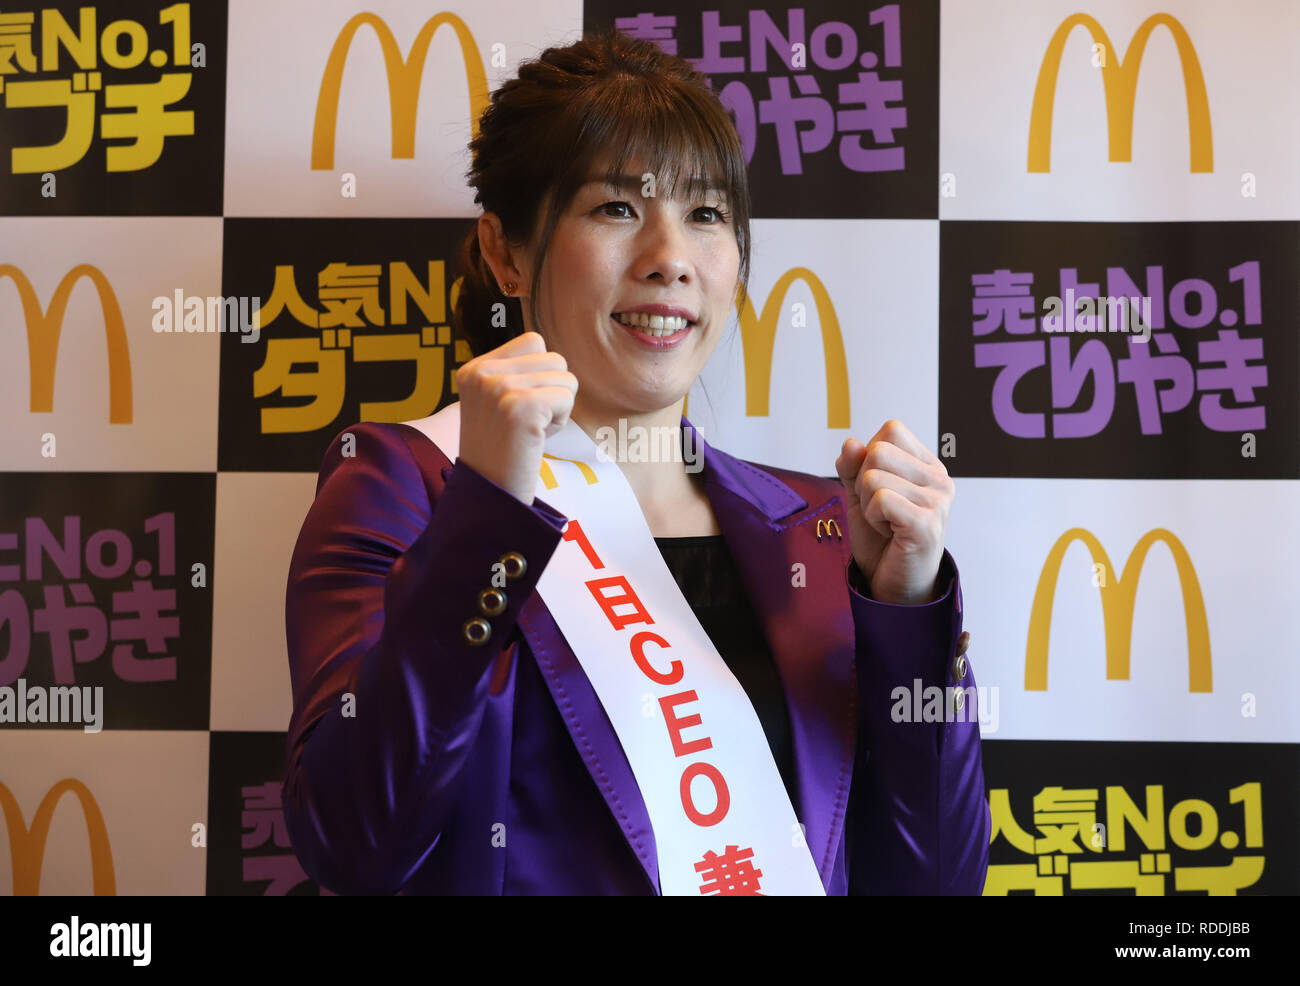 January 18, 2019, Tokyo, Japan - Three times Olympic wrestling gold medalist Saori Yoshida smiles as she acts as CEO-for-a-day of McDonald's restaurant chain at a McDonald's restaurant in Tokyo on Friday, January 18, 2019. Yoshida attended her first comercial event after she announced reirement from wrestling career last week.   (Photo by Yoshio Tsunoda/AFLO) Stock Photo